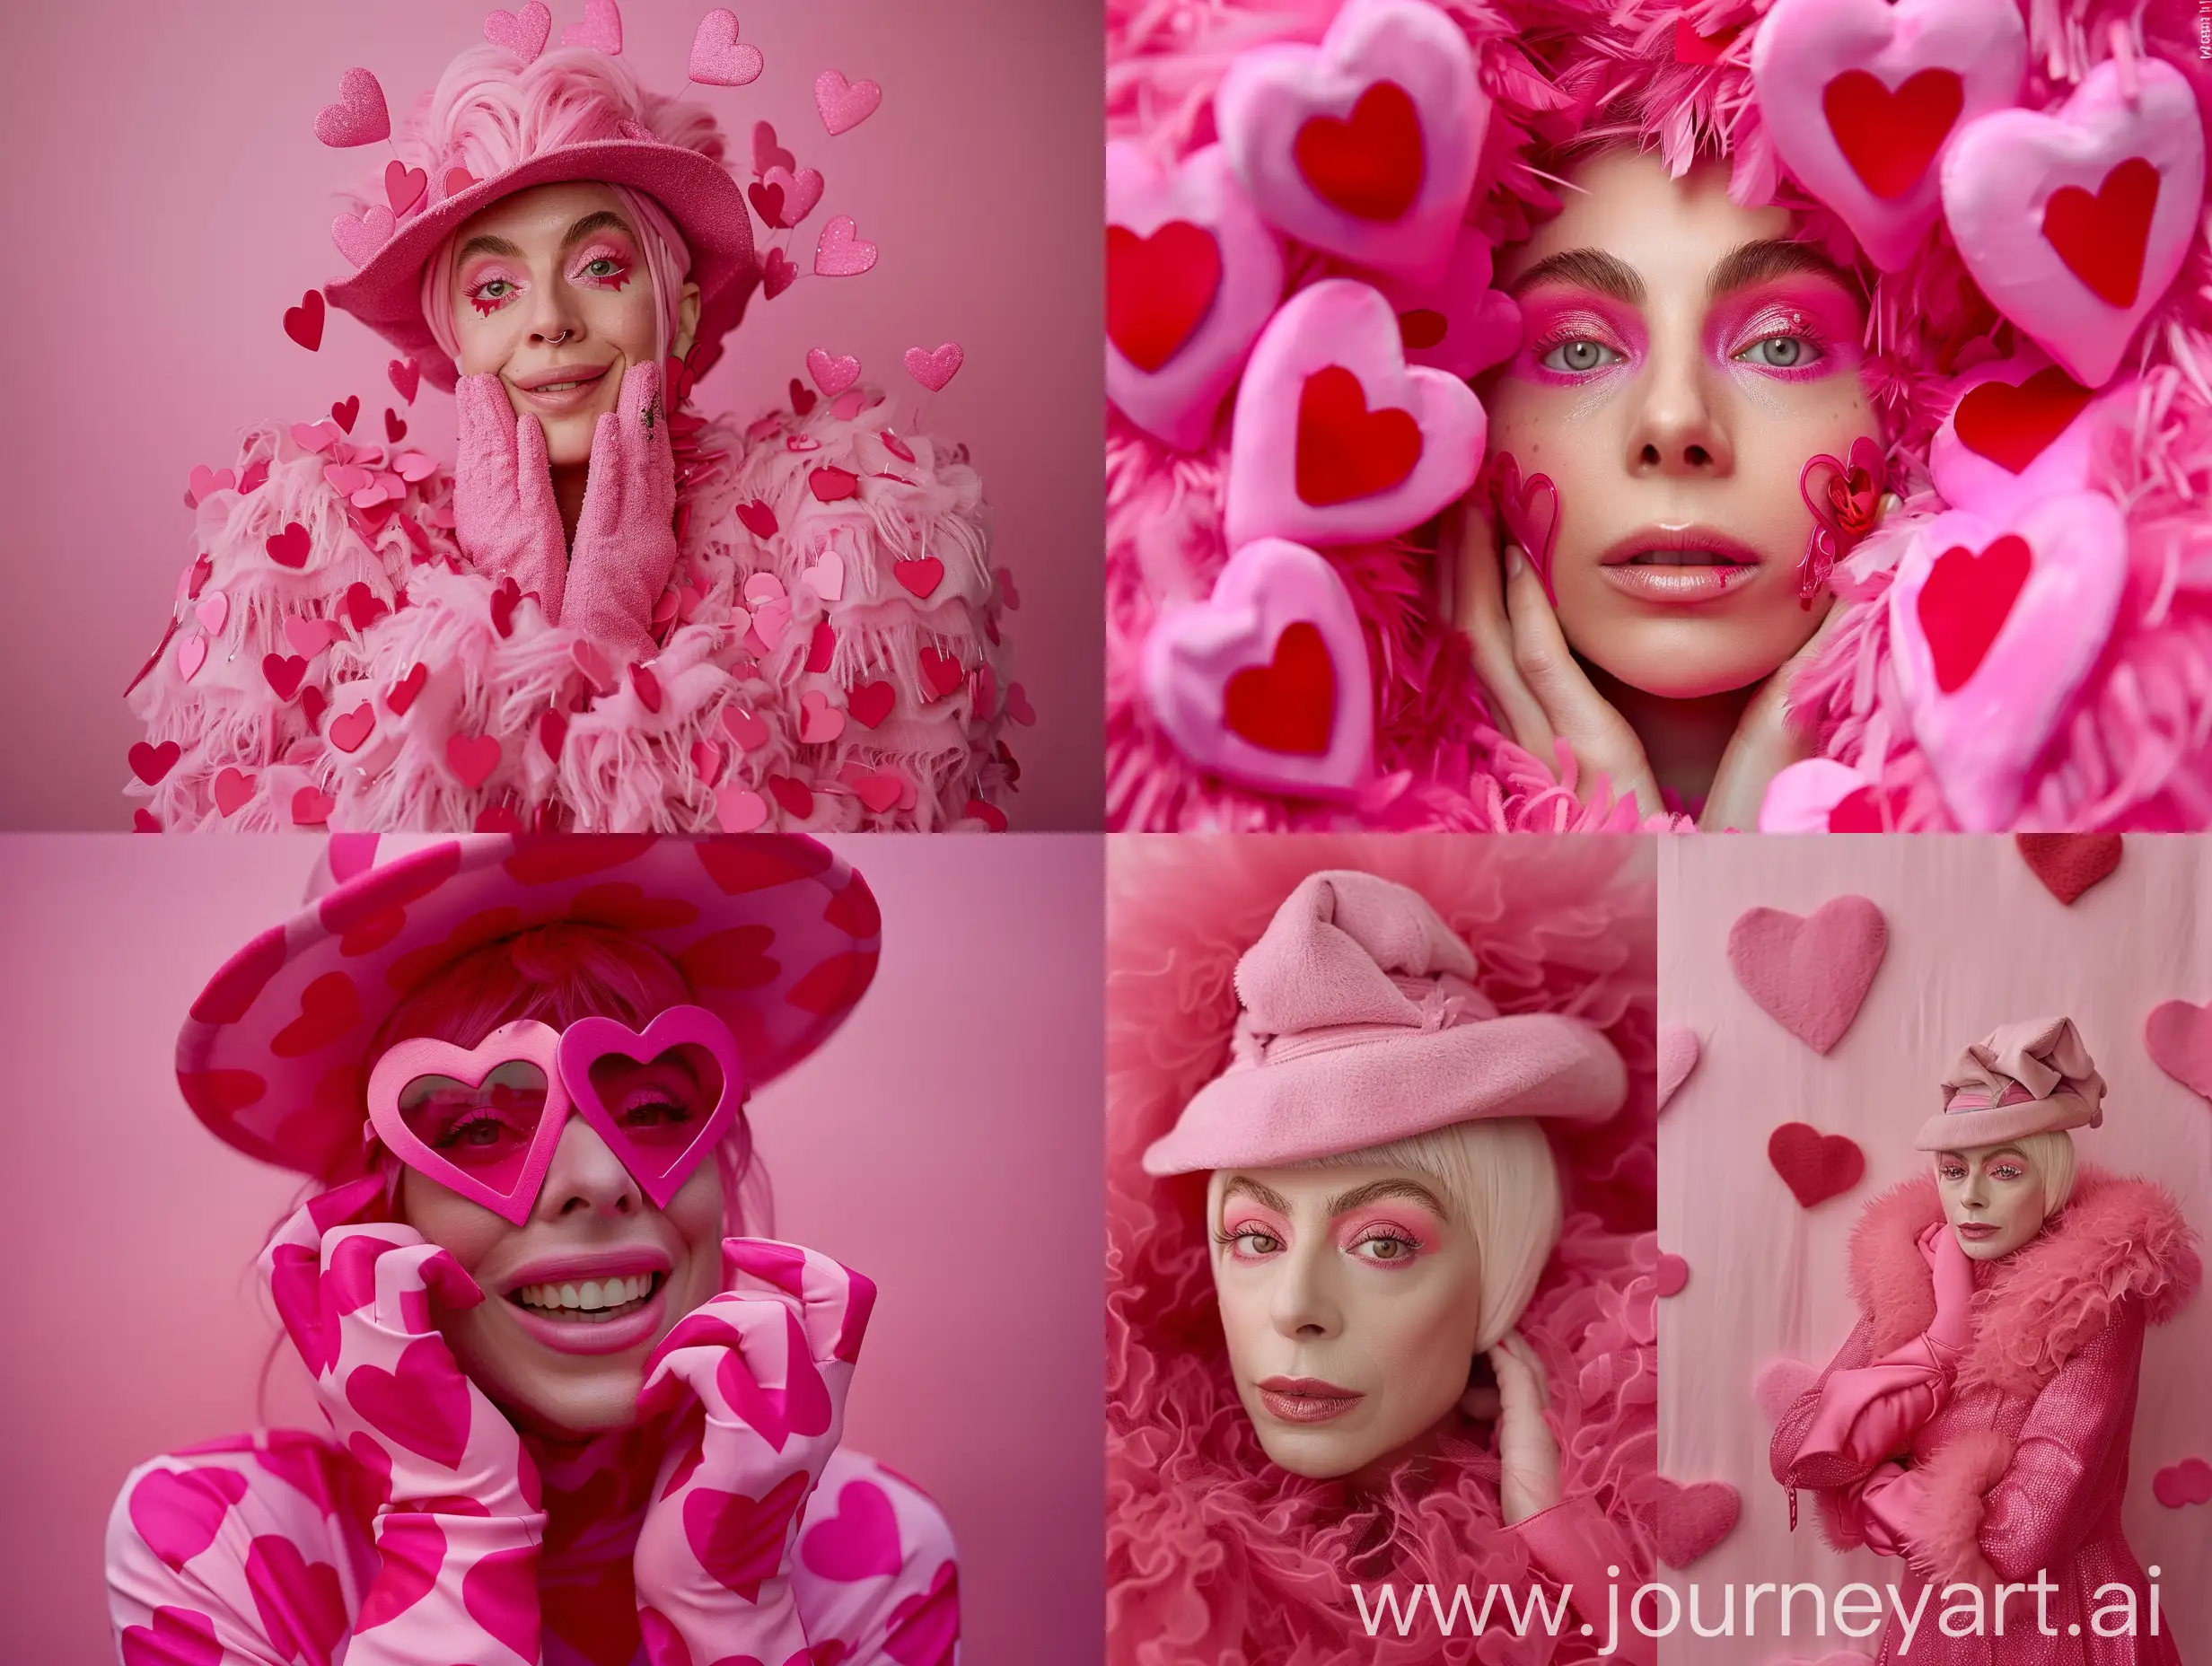 {subject} the style of fashion photography, pink everywhere, hearts, marat safin, cheerful colors, lovecore, no hands, subtle smile lady Gaga